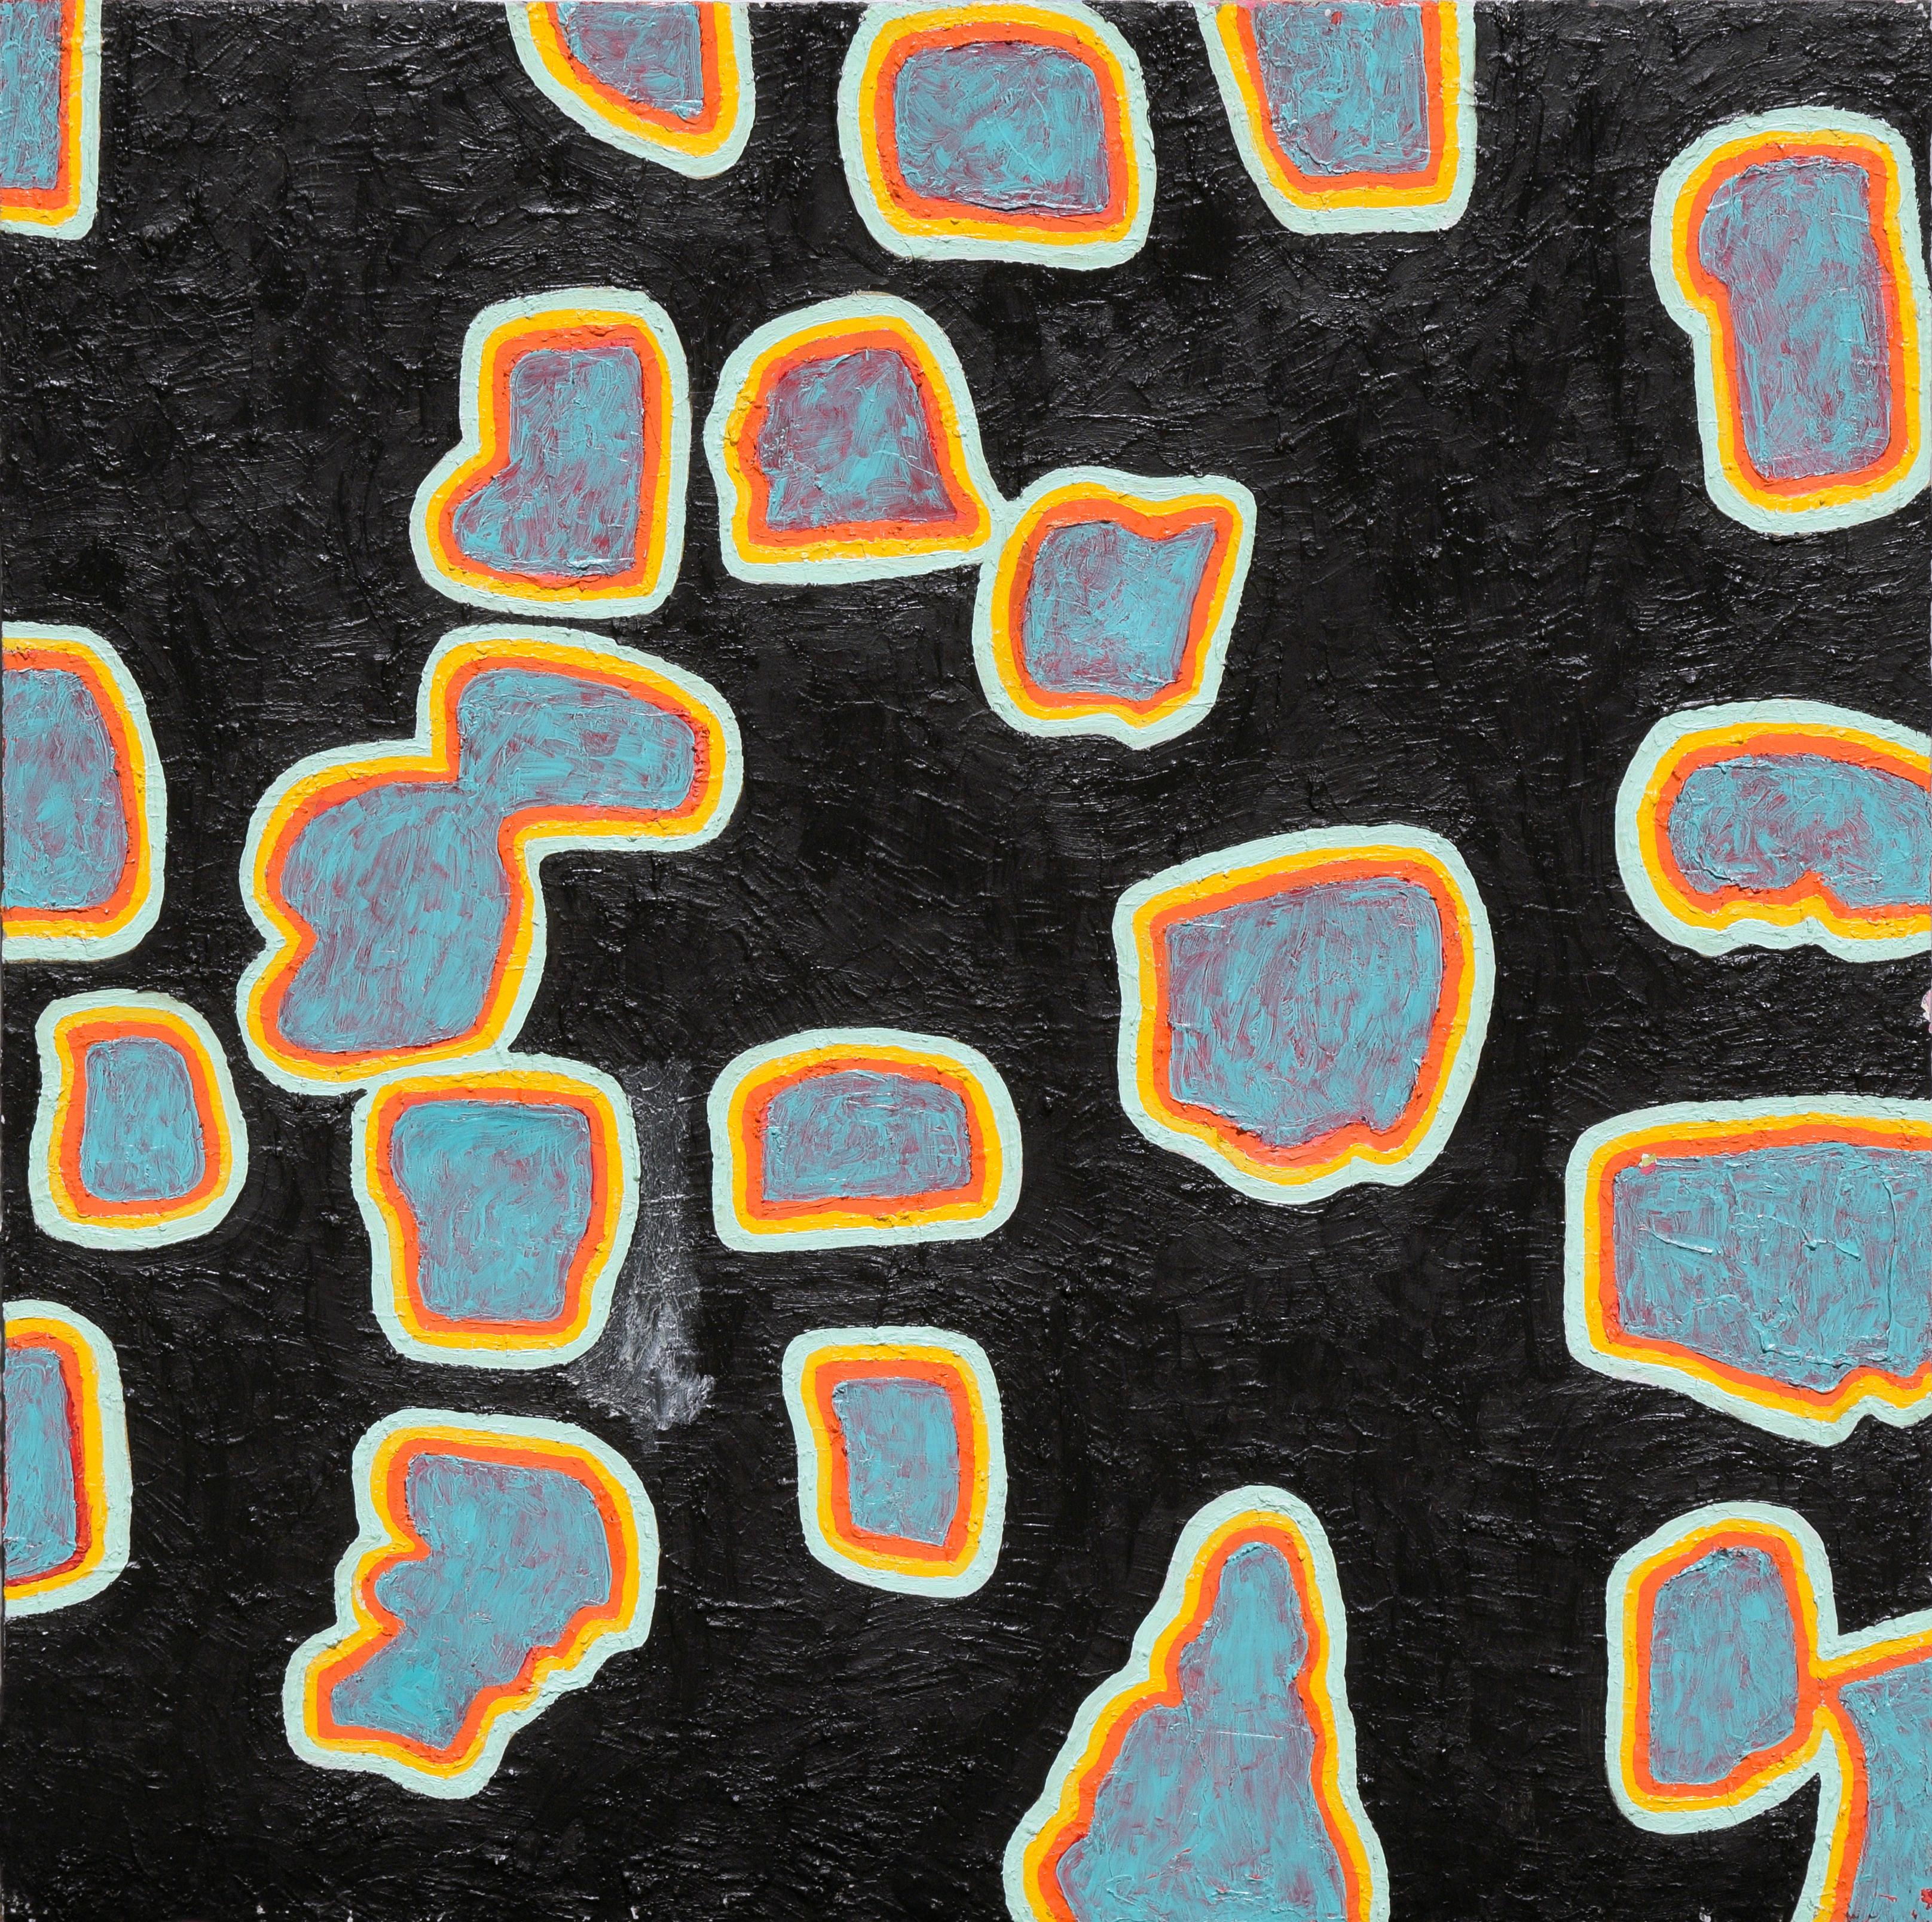 Michael Pauker  Abstract Painting - Blue and Orange Shapes on a Black Field